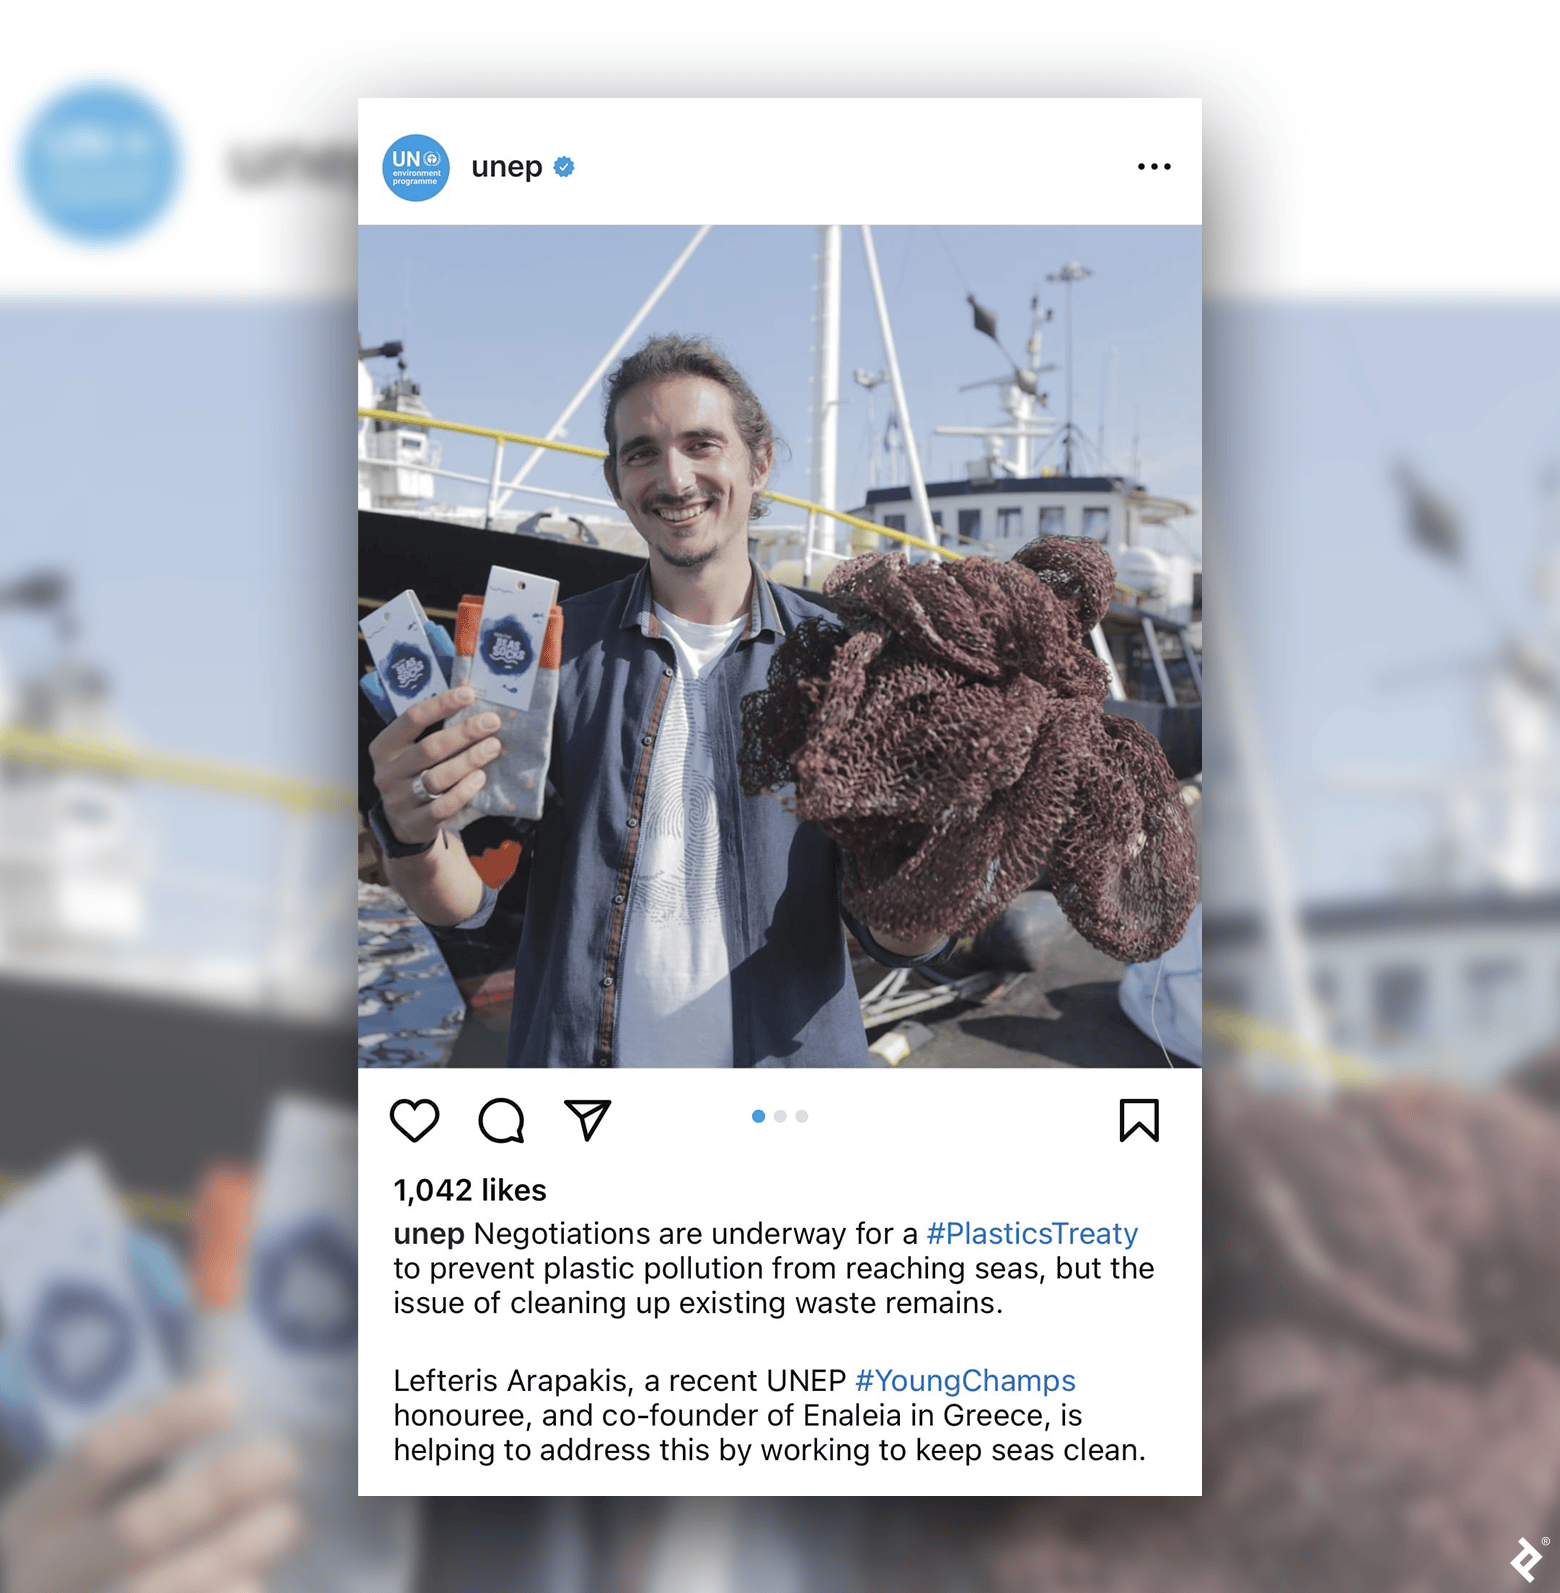 An Instagram post by UNEP shows a photo of a man holding a fishing net and two pairs of Seas Socks in front of a boat.